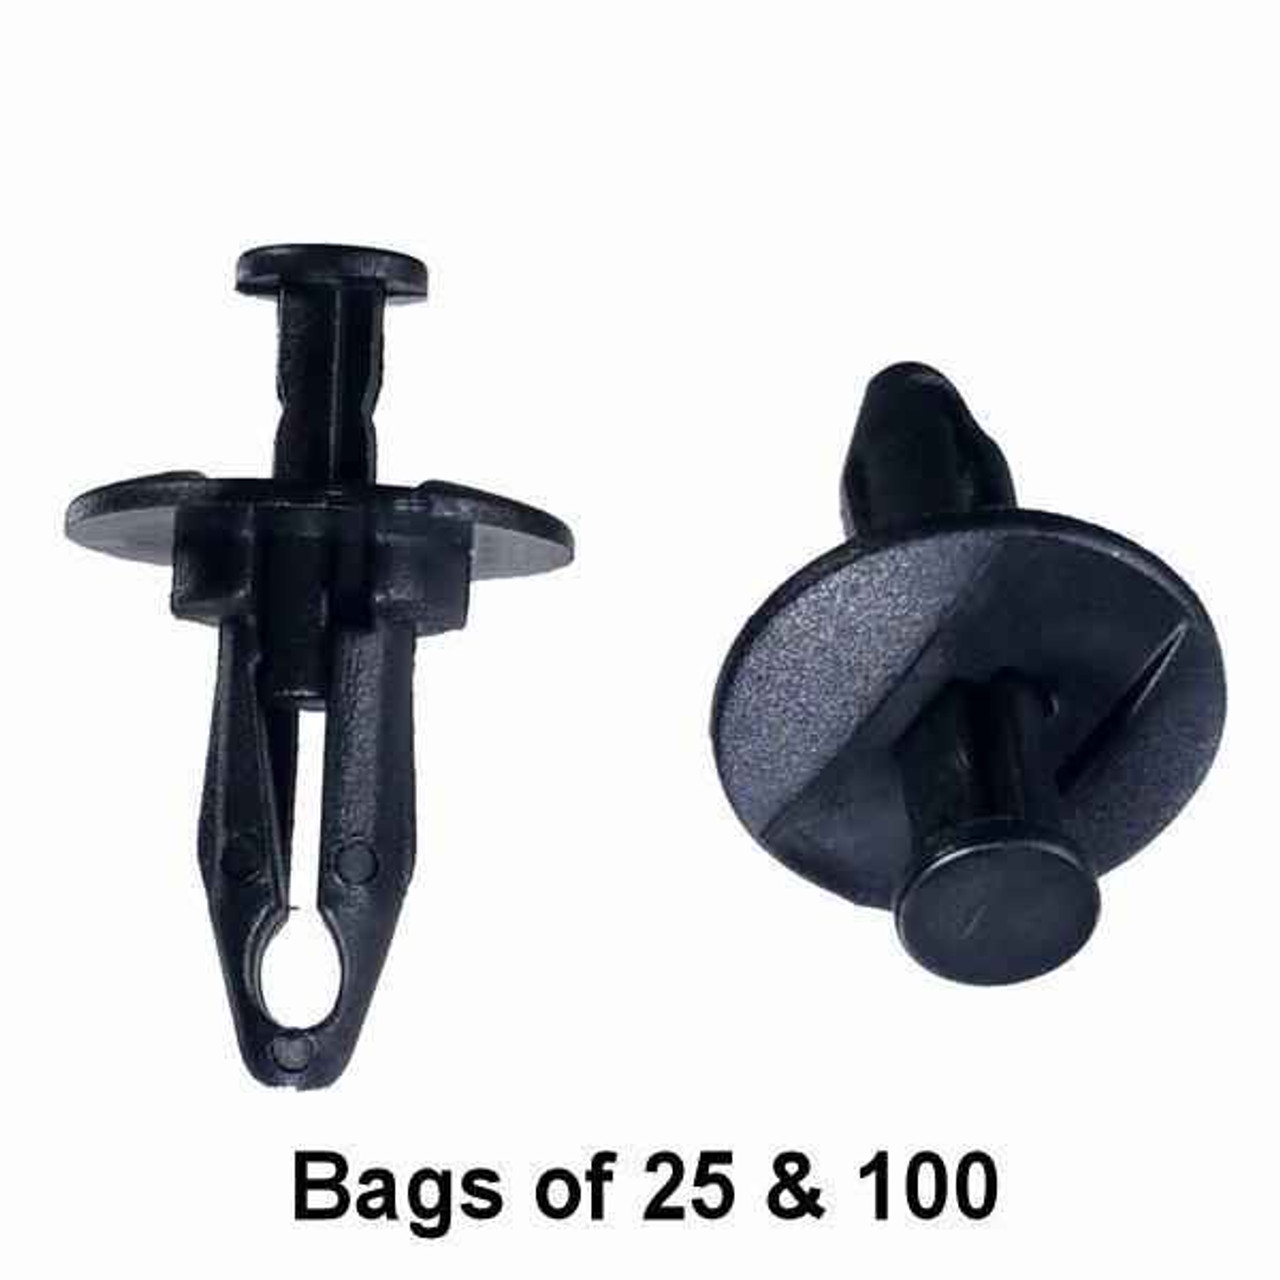 GM Bumper Push Retainer Clips - Fits 9.5mm (3/8) Hole